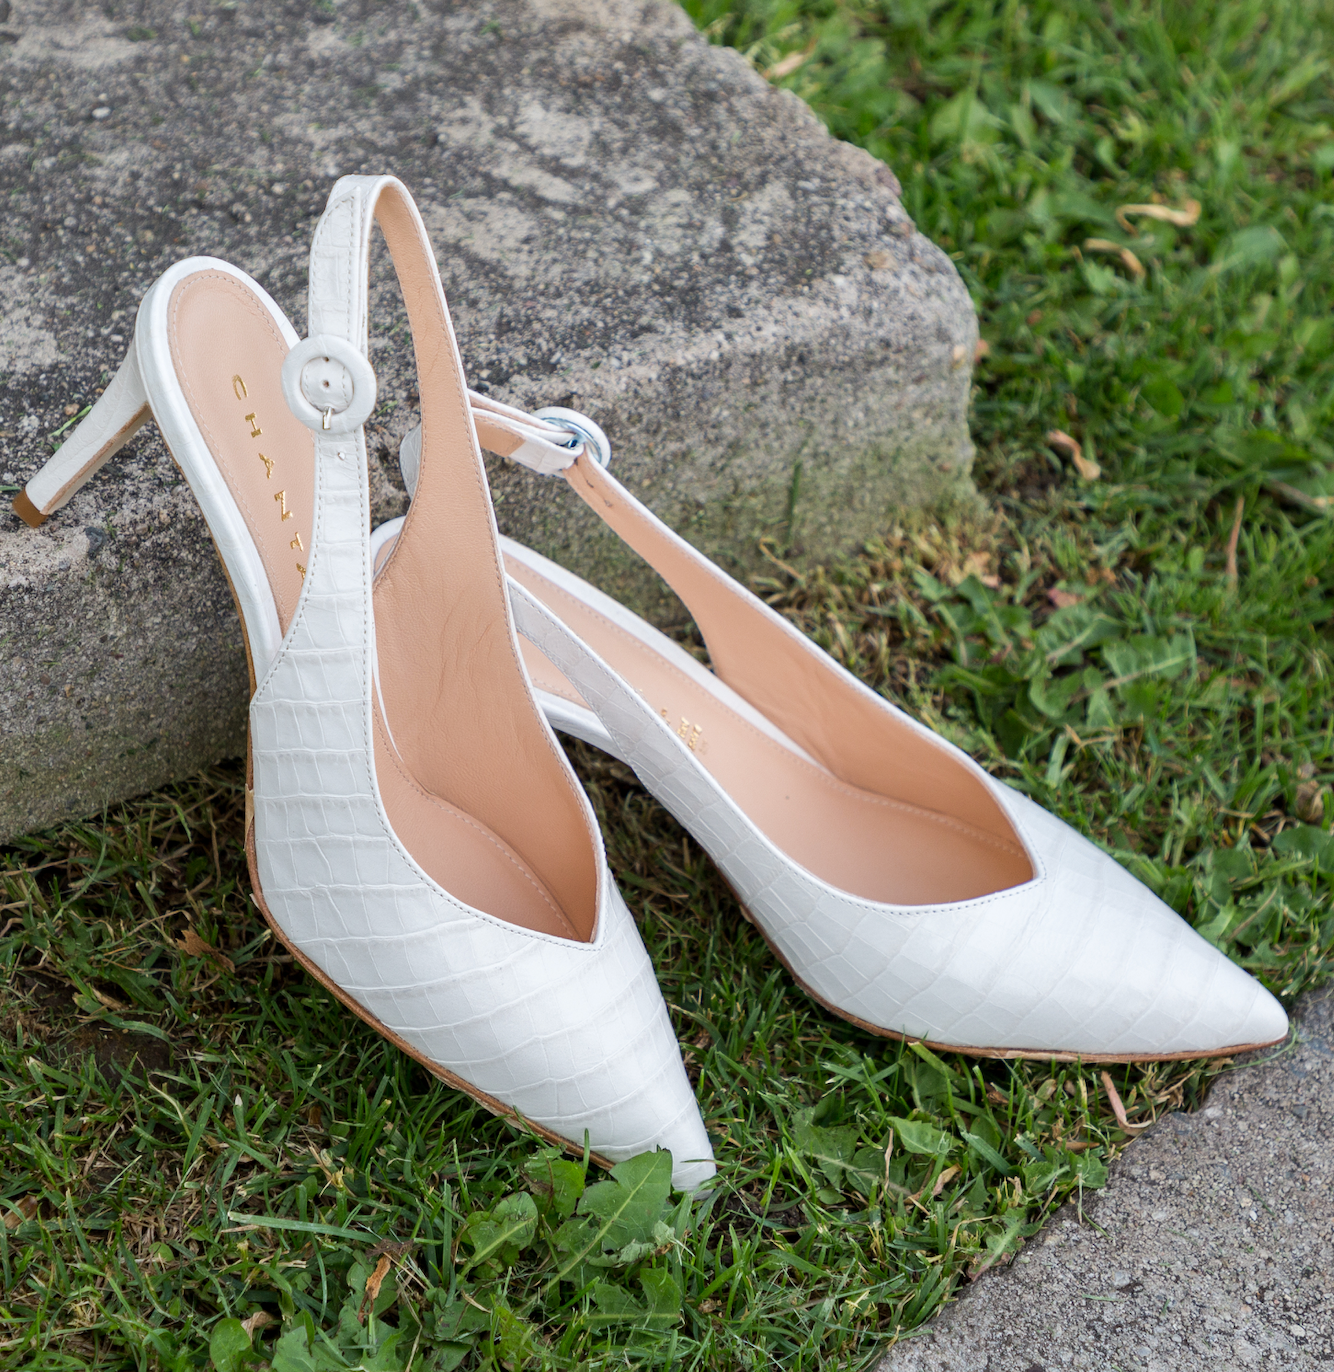 Cocco White Sling Back Pumps Heels 1039/White - 6